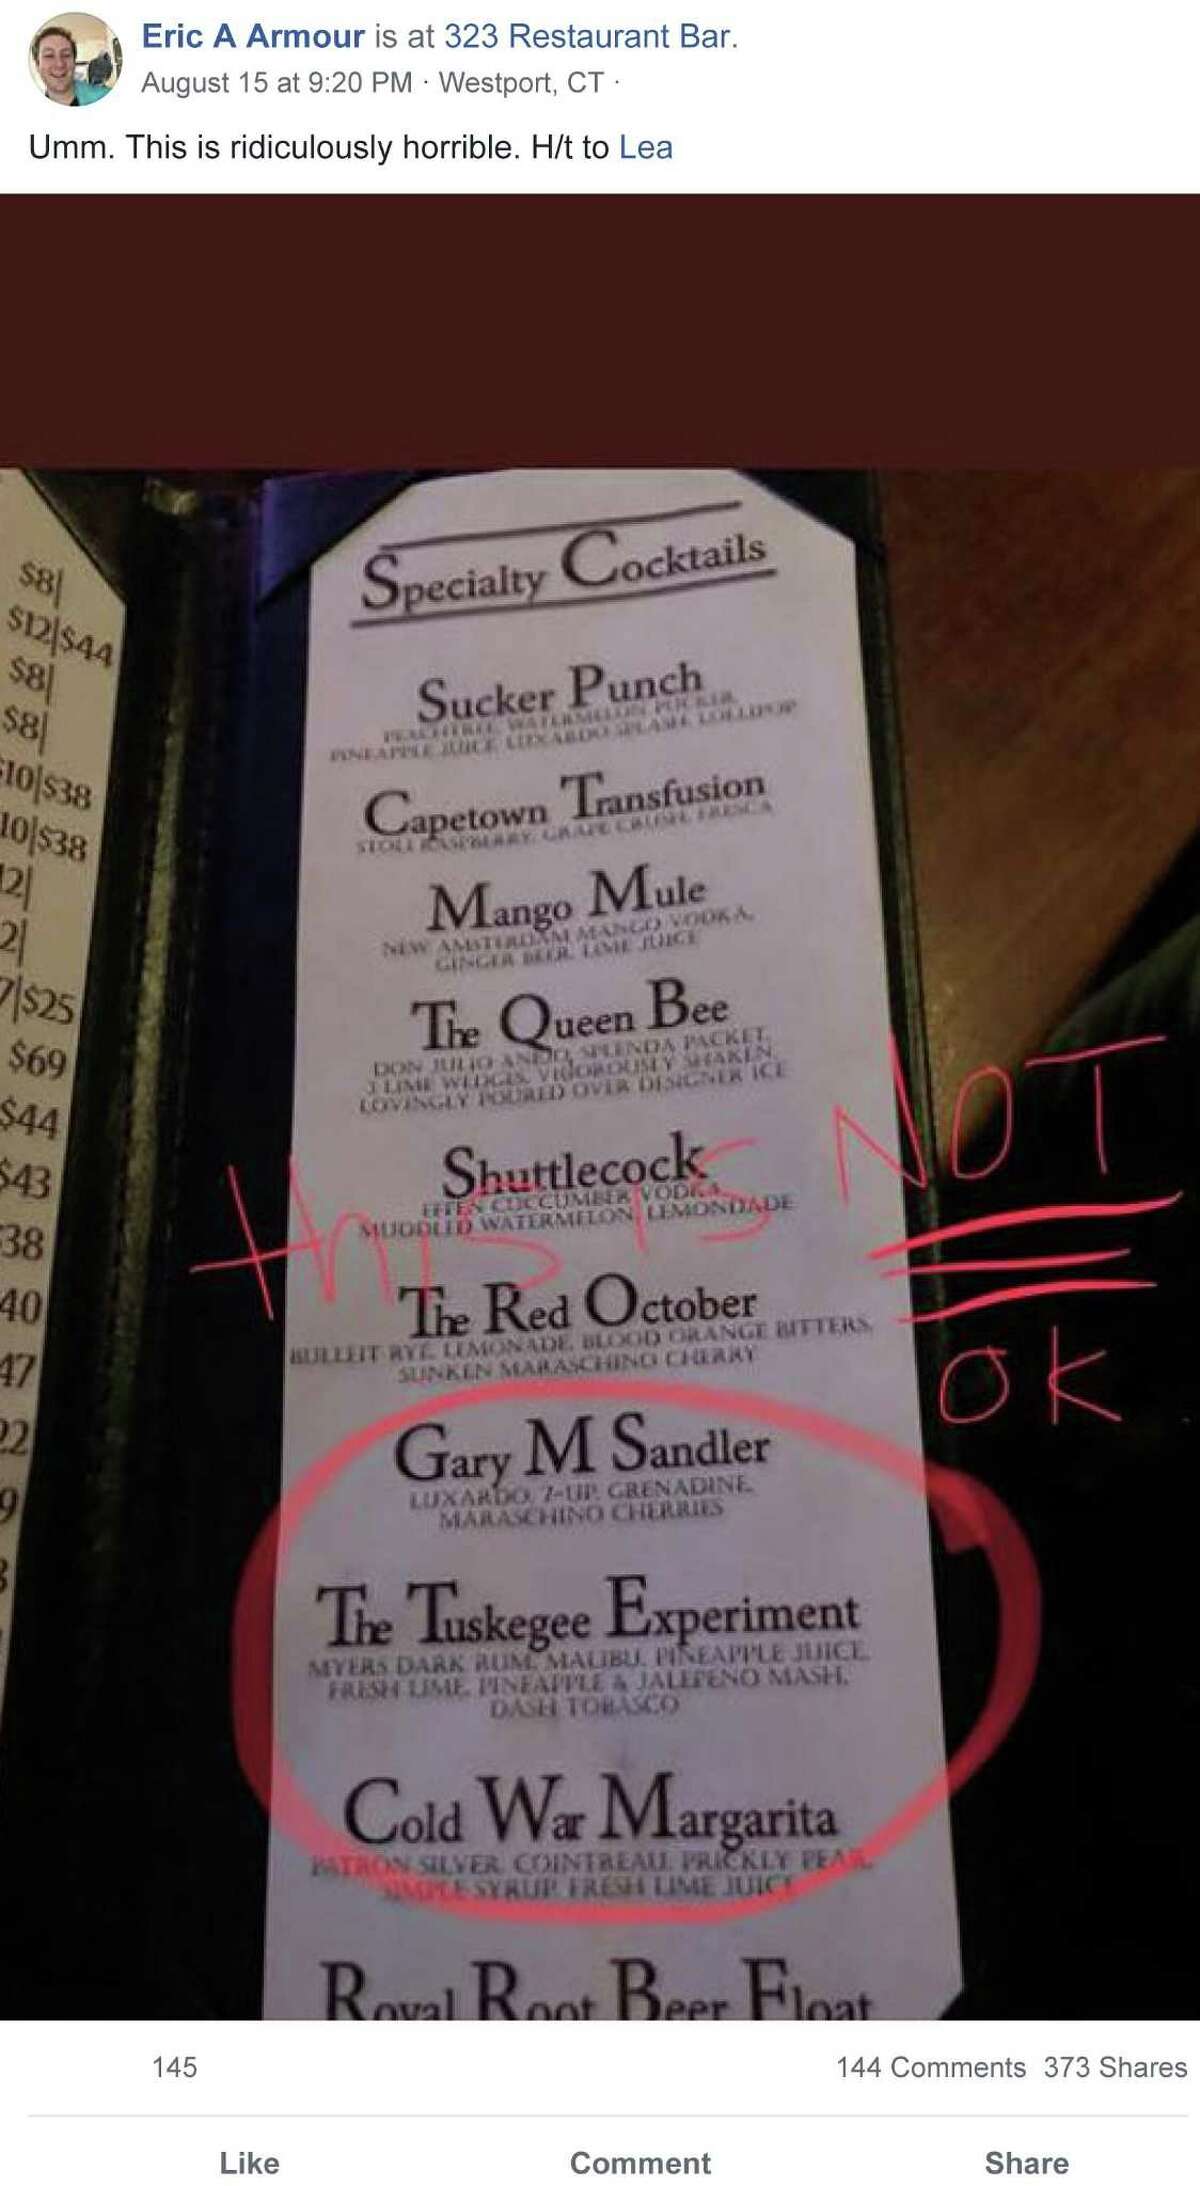 On Aug. 15, Eric A Armour posted a photo of the specialty cocktail menu at 323 Restaurant in Westport, which included a cocktail called "The Tuskegee Experiment."